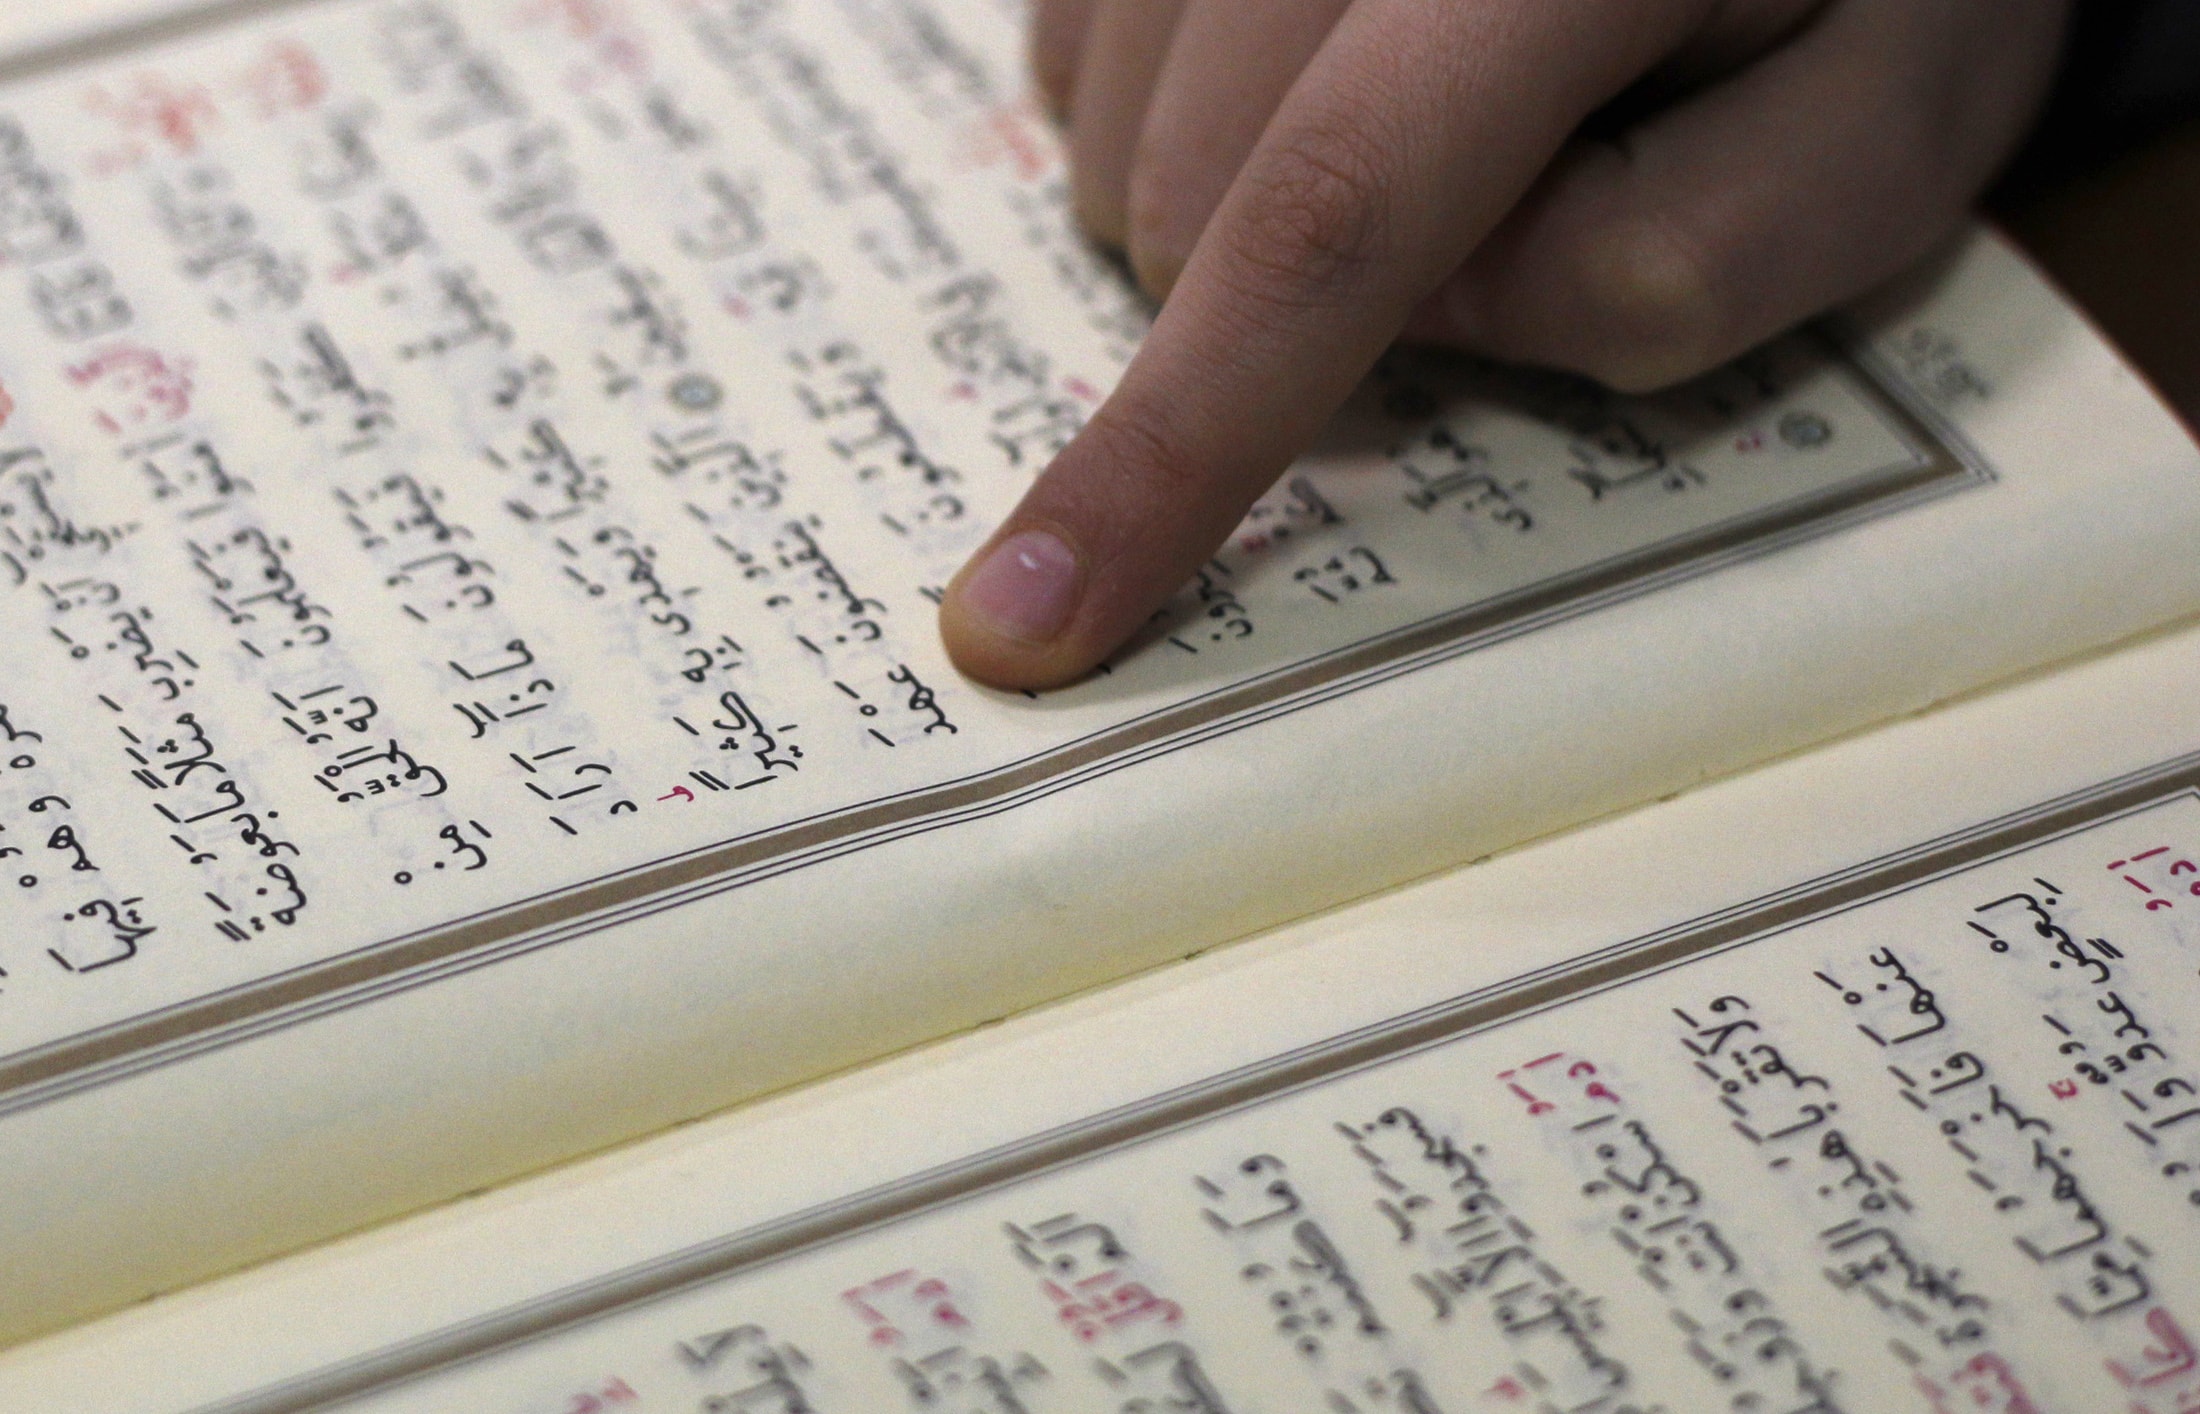 A closeup of pages of the Qur'an, REUTERS/Ina Fassbender